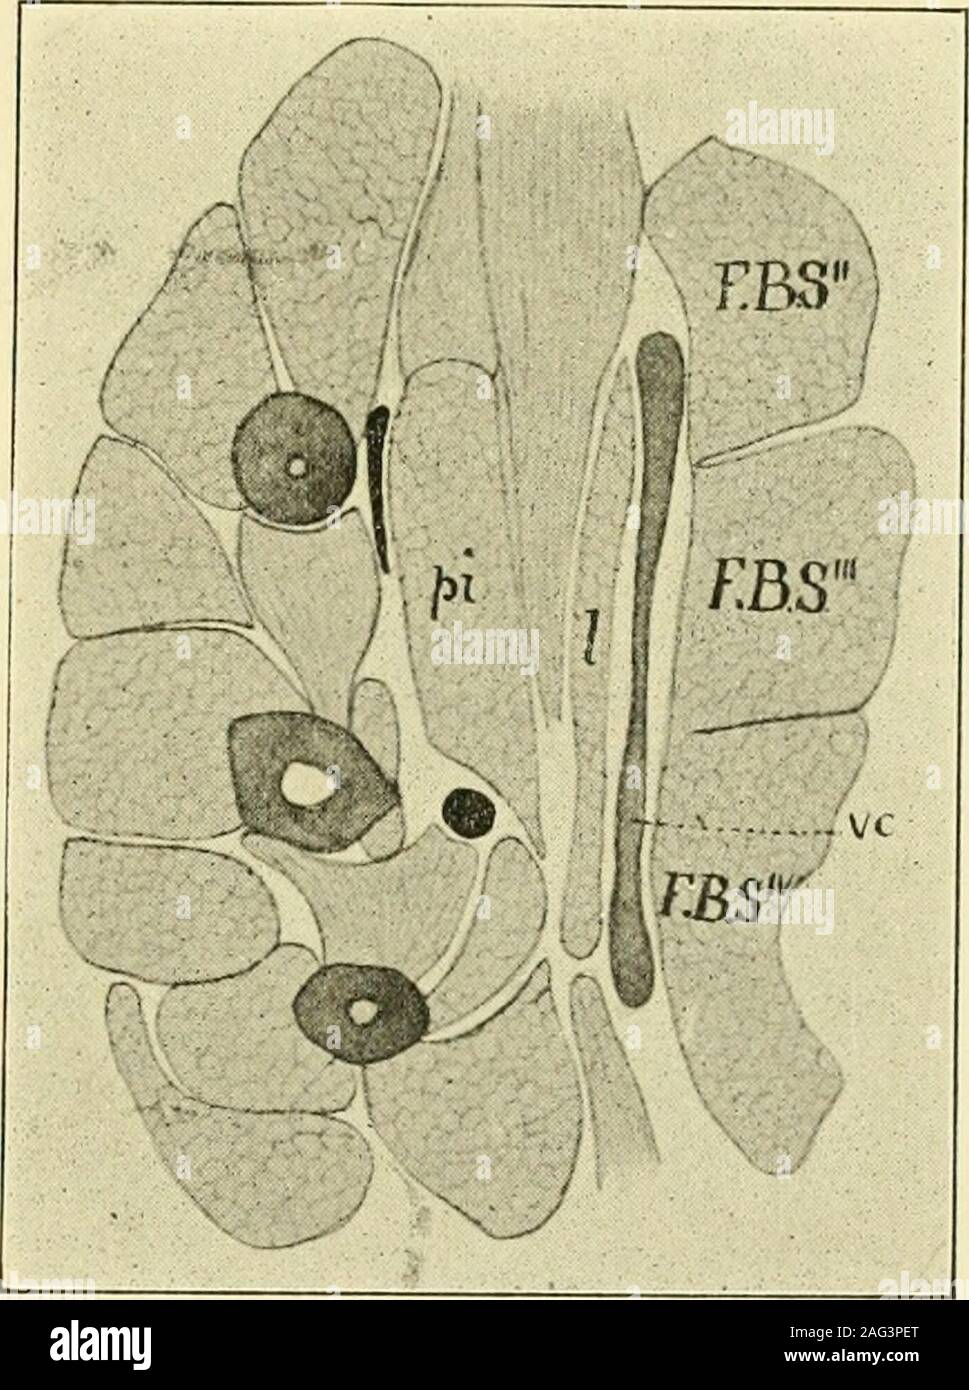 . The American journal of anatomy. flexores brevesmedii reach a much greater devel-opment than in the lower groupand are arranged in two distinctlayers, the superficial one (Fig.11, I) lying immediately beneaththe volar cartilage, from which ittakes origin, while the deeperone (pi) is in relation with theunderlying metacarpal bones. This latter layer does not concern us at present and will be left for con-sideration on another occasion. The superficial layer when traced distallydivides into four portions which pass to the II-V digits, there being noportion for the pollex. Each portion lies ben Stock Photo